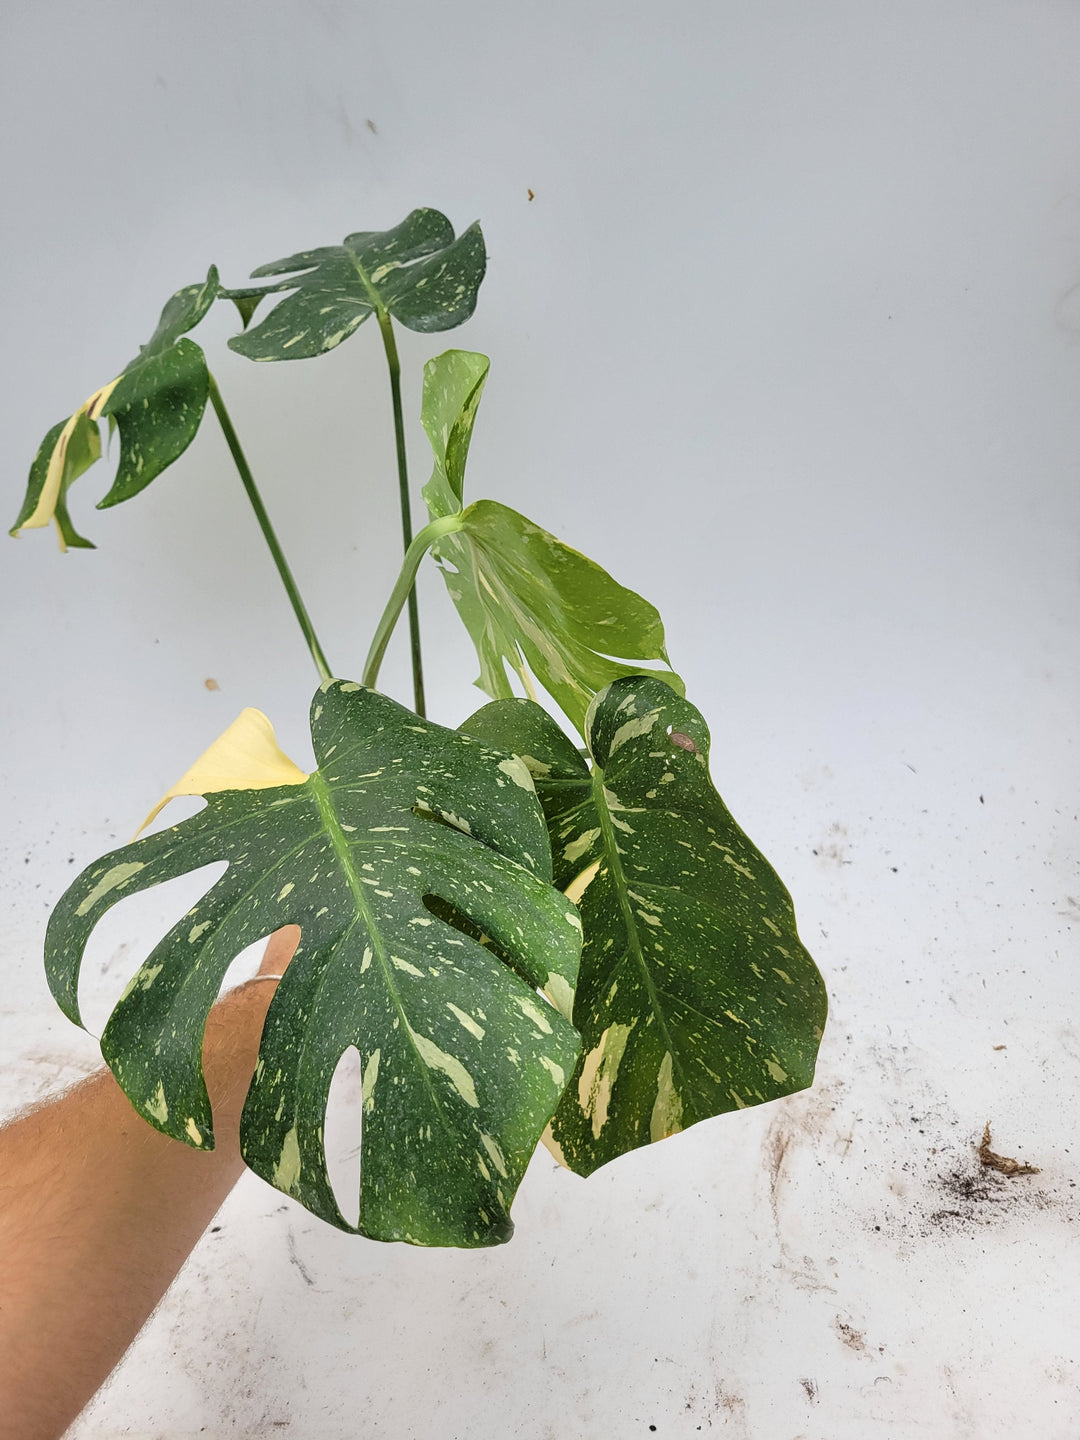 Monstera Thai Constellation,  XL size,  Highly variegated, Japanese Cultivar, exact plant pictured  US Seller #t30